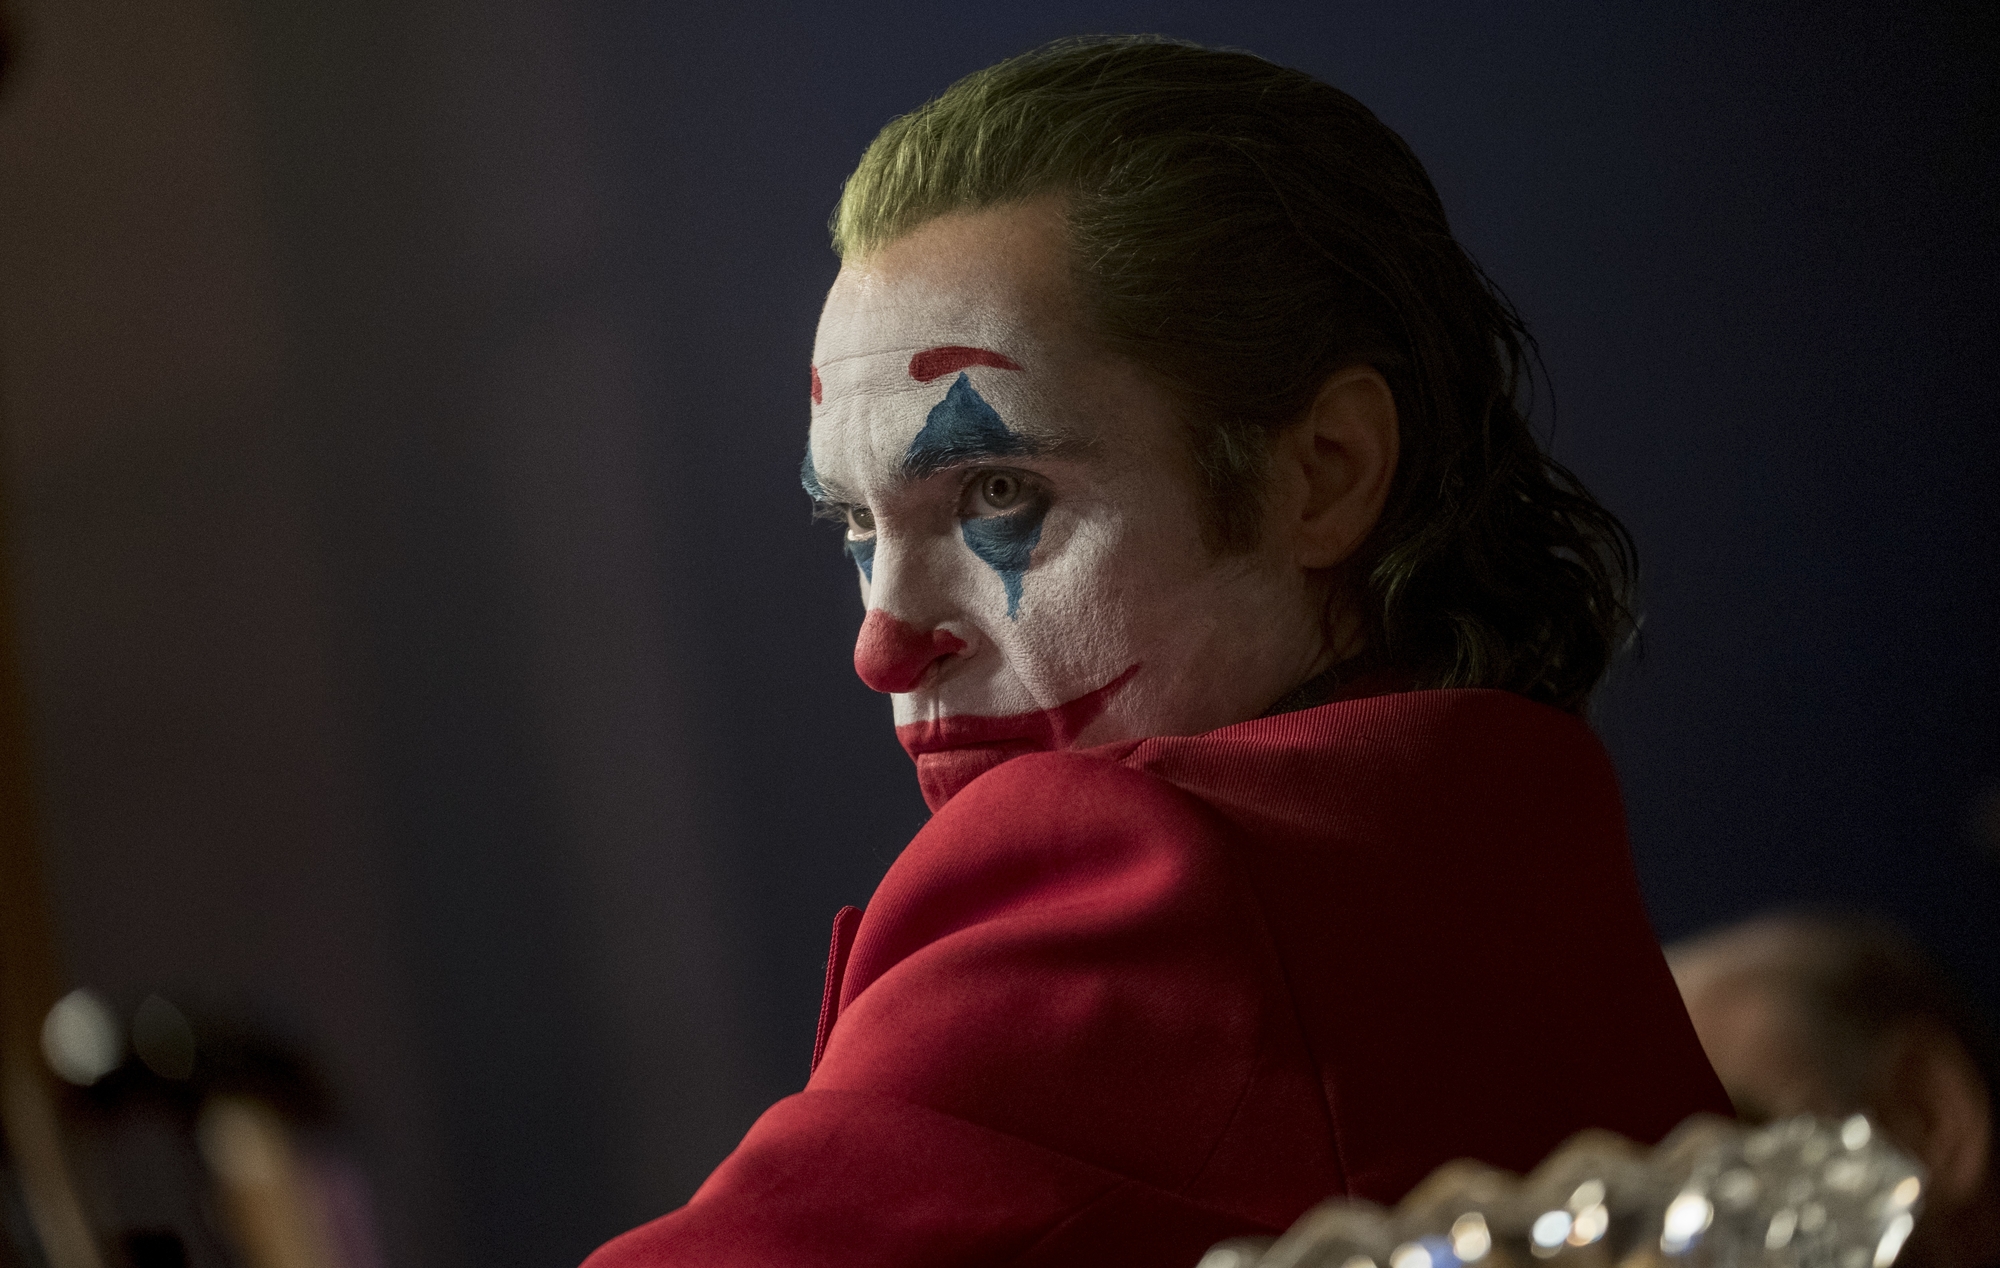 'Joker 2' composer teases there’ll be "a lot of music" in the sequel